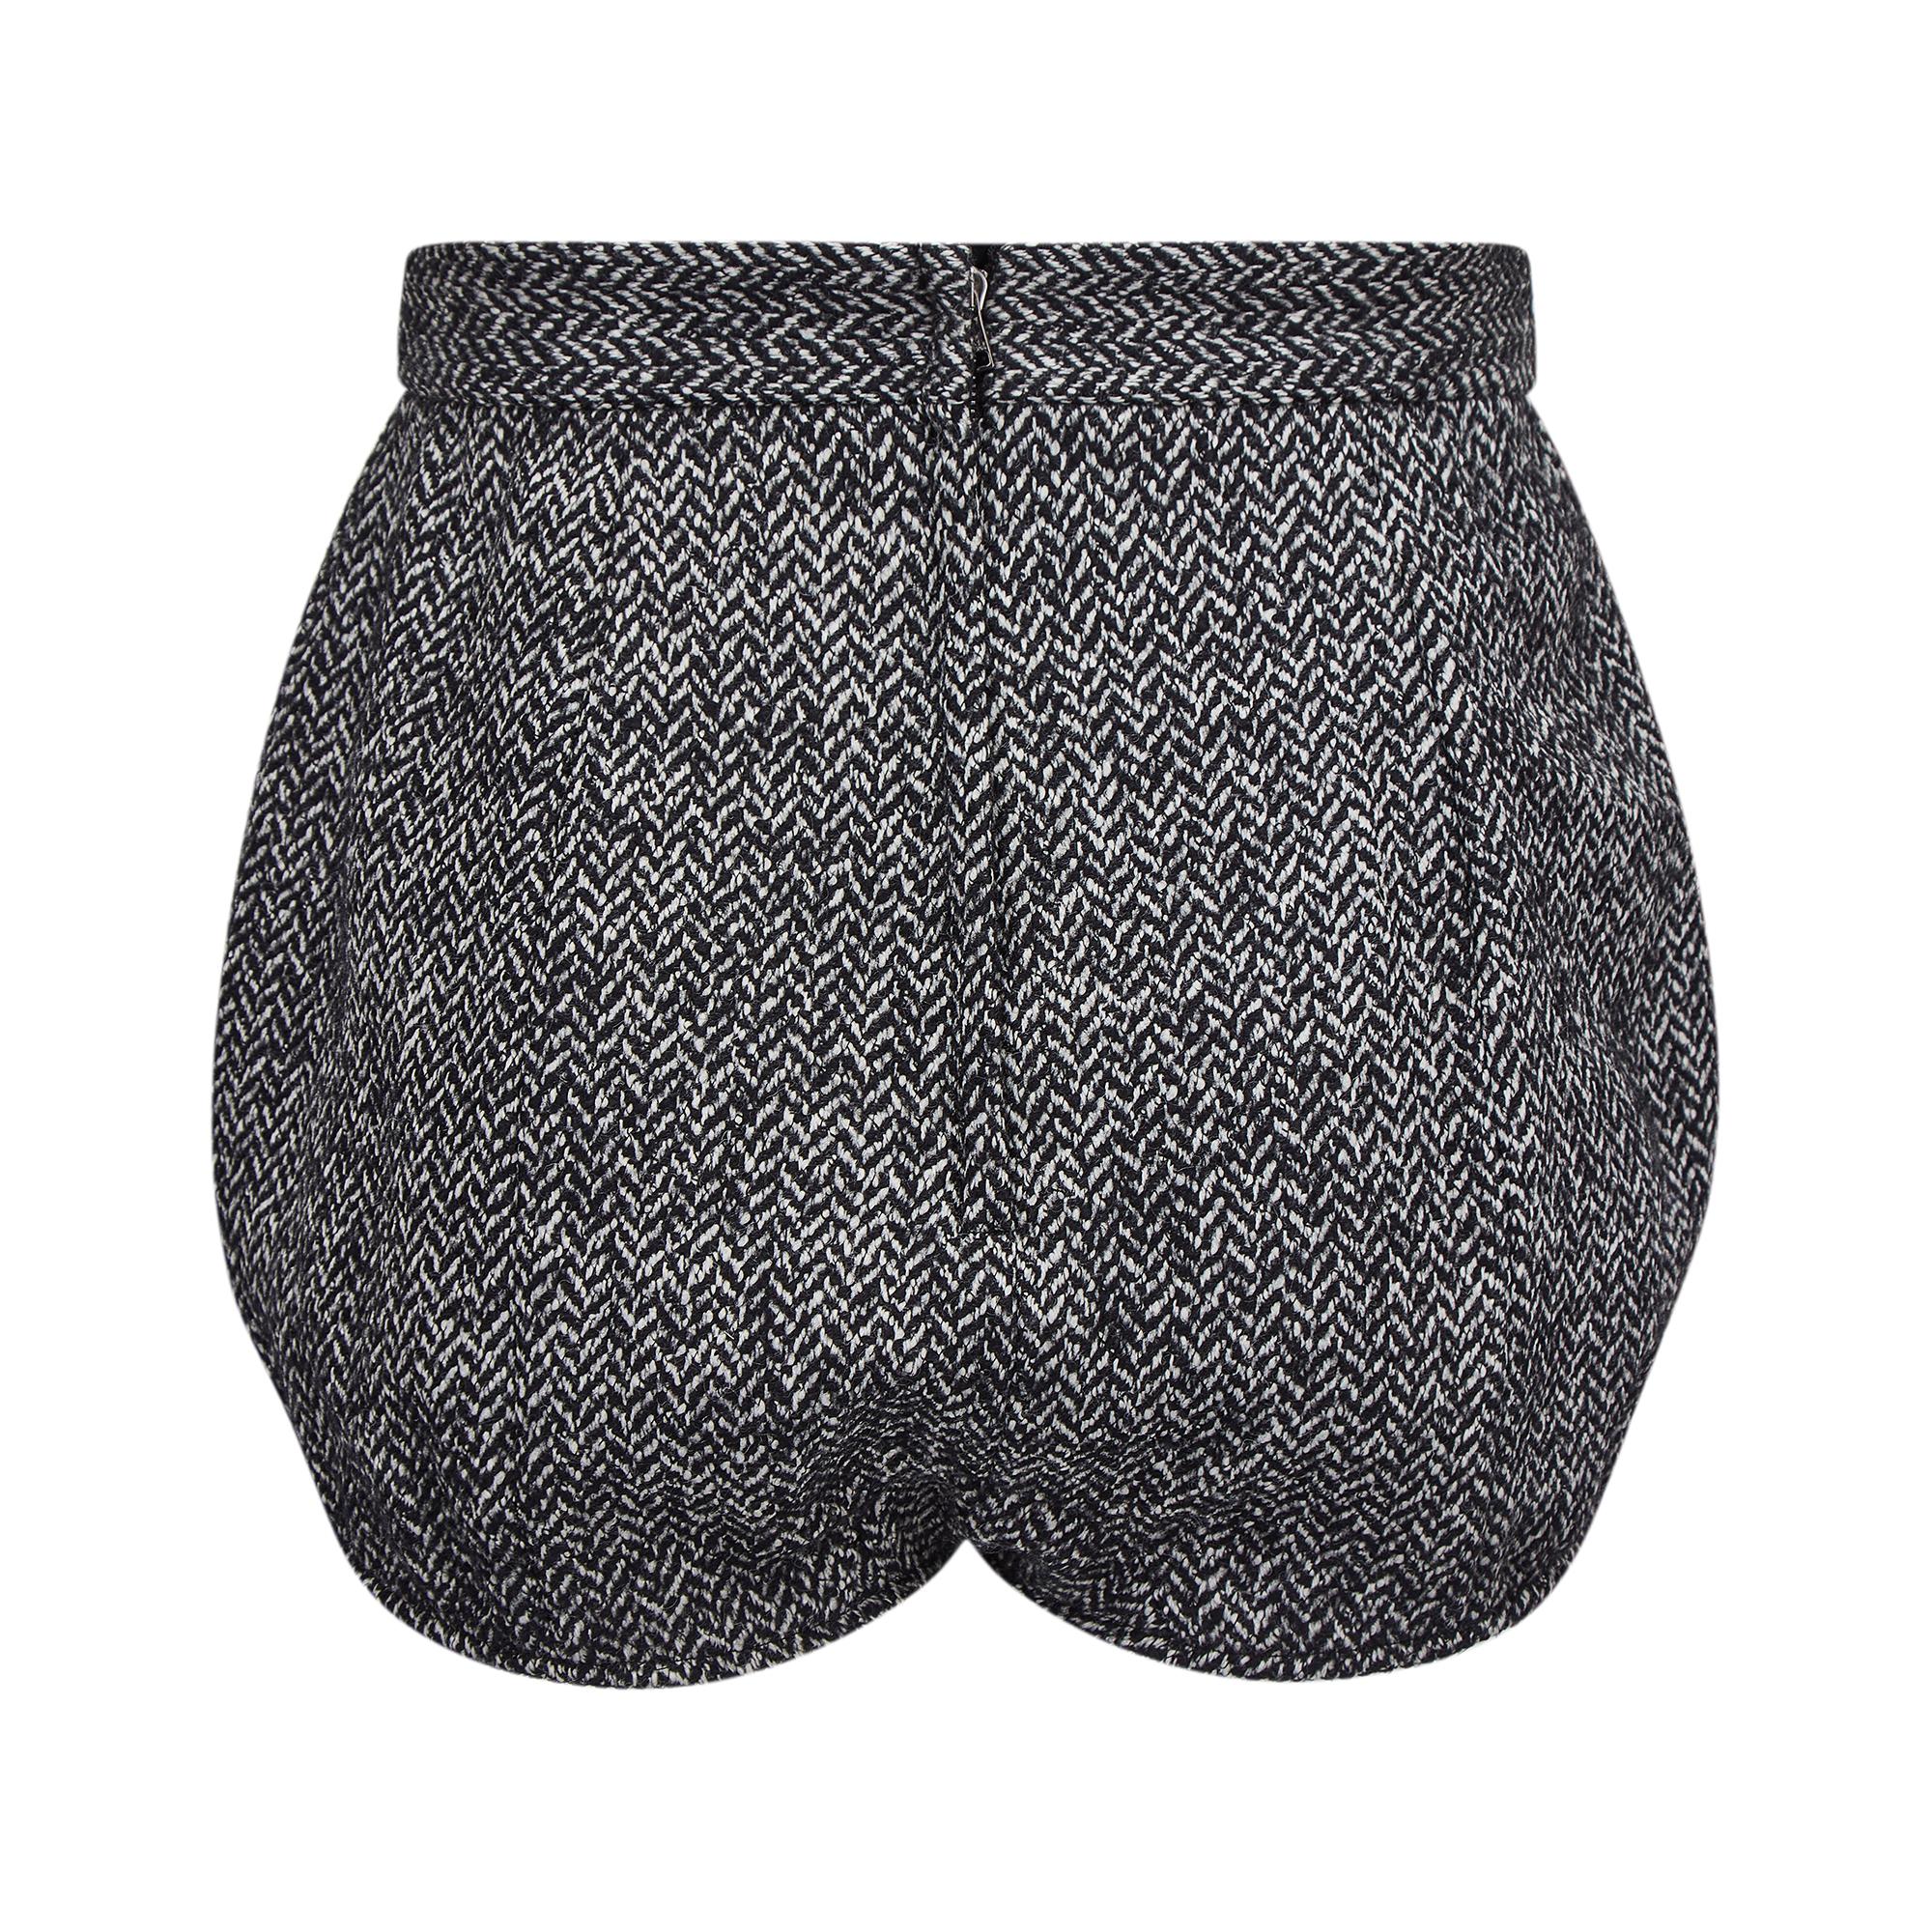 2013 Runway Dolce and Gabbana Monochrome Tweed Hotpants In Excellent Condition For Sale In London, GB